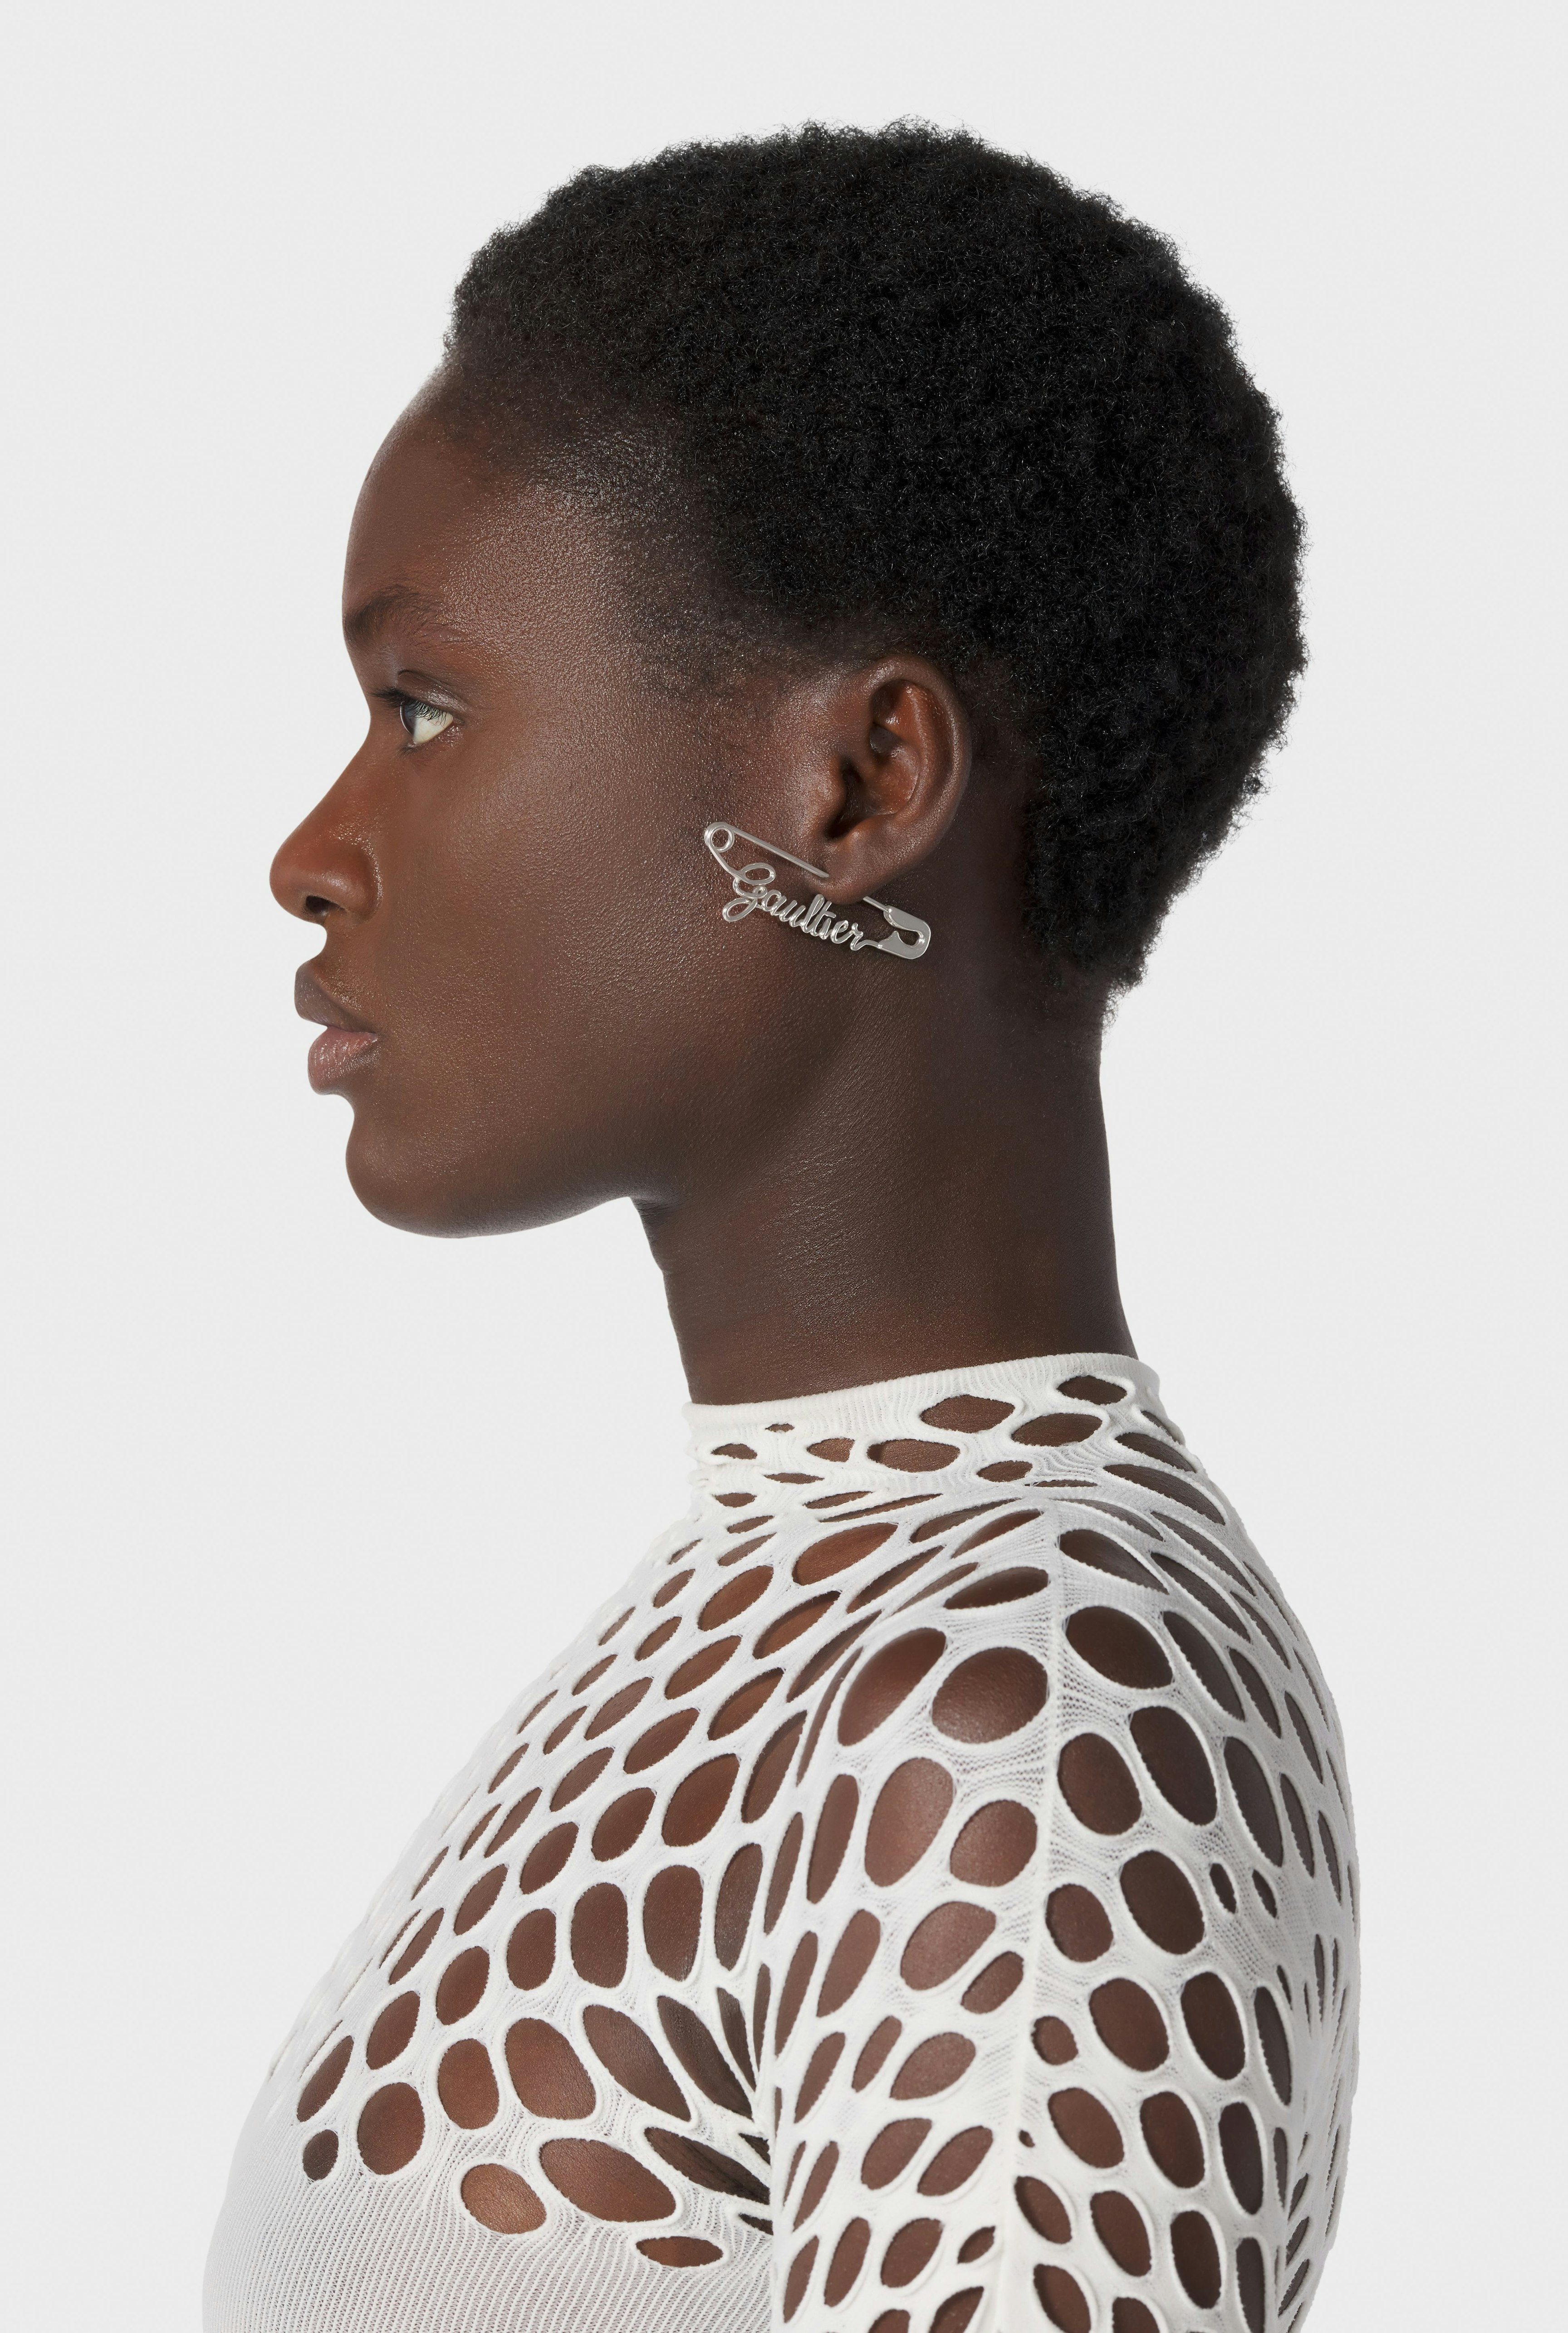 The Silver-Tone Gaultier Safety Pin Earring